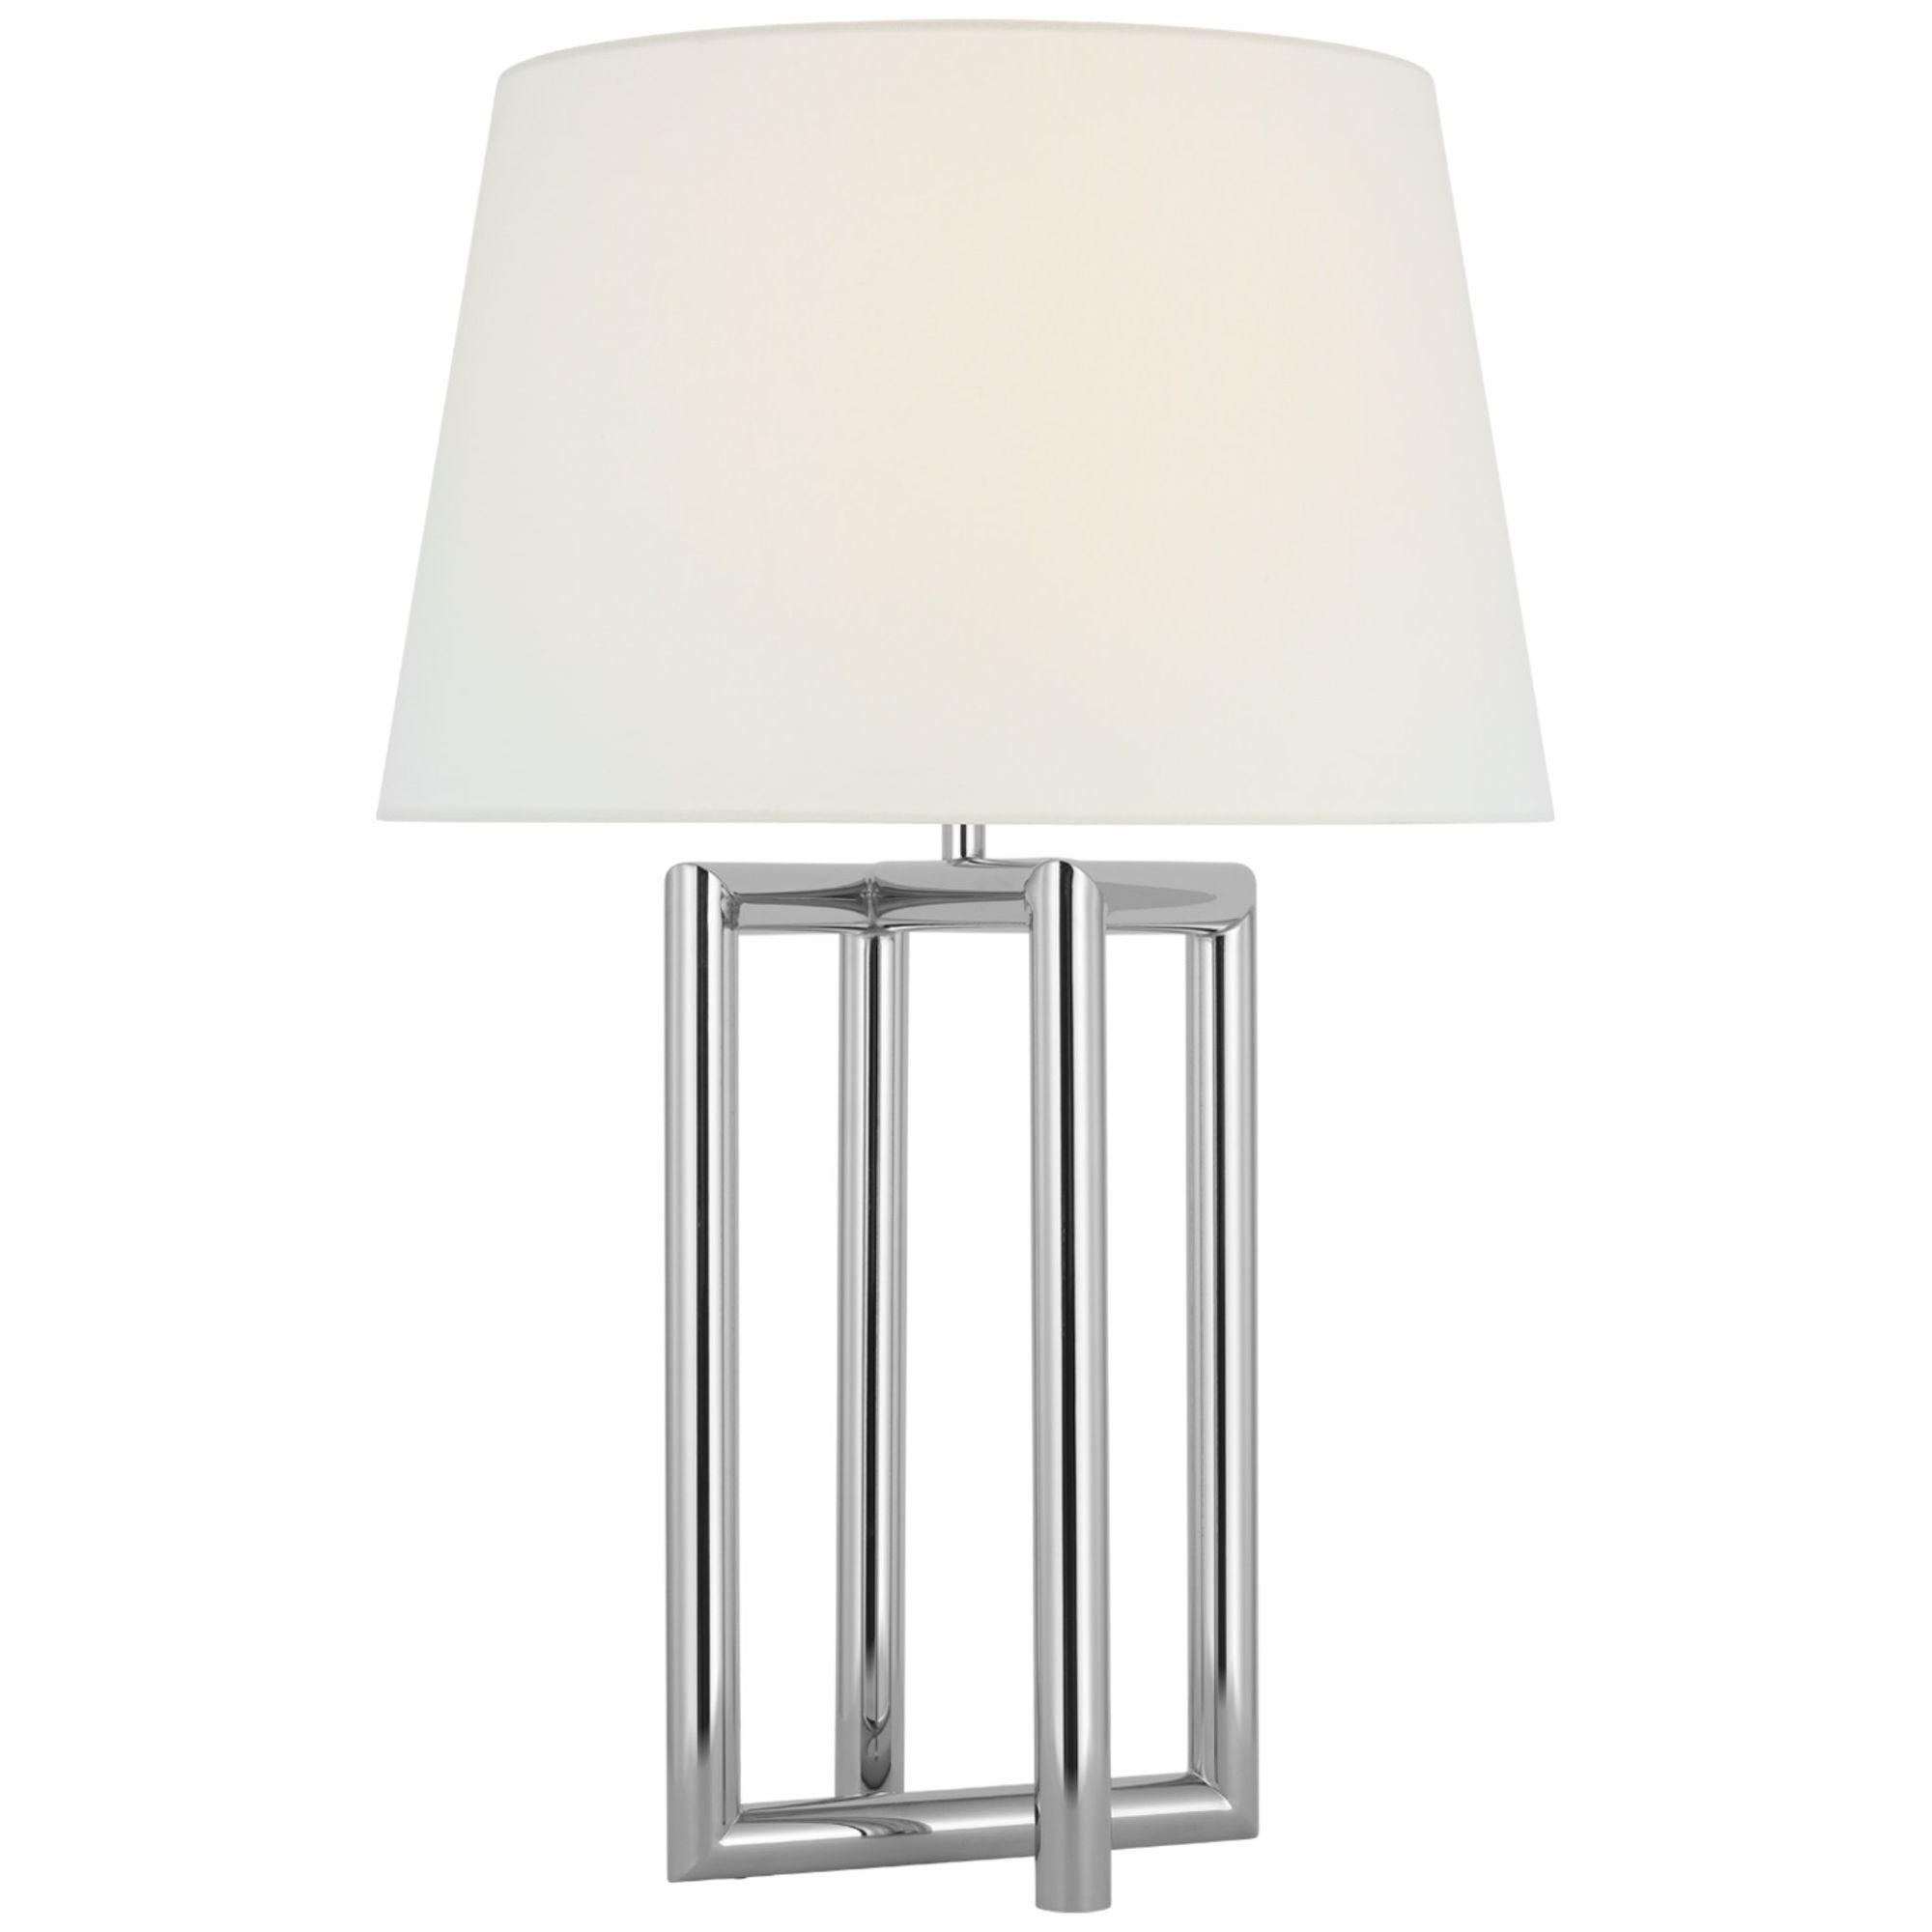 Paloma Contreras Concorde Large Table Lamp in Polished Nickel with Linen Shade